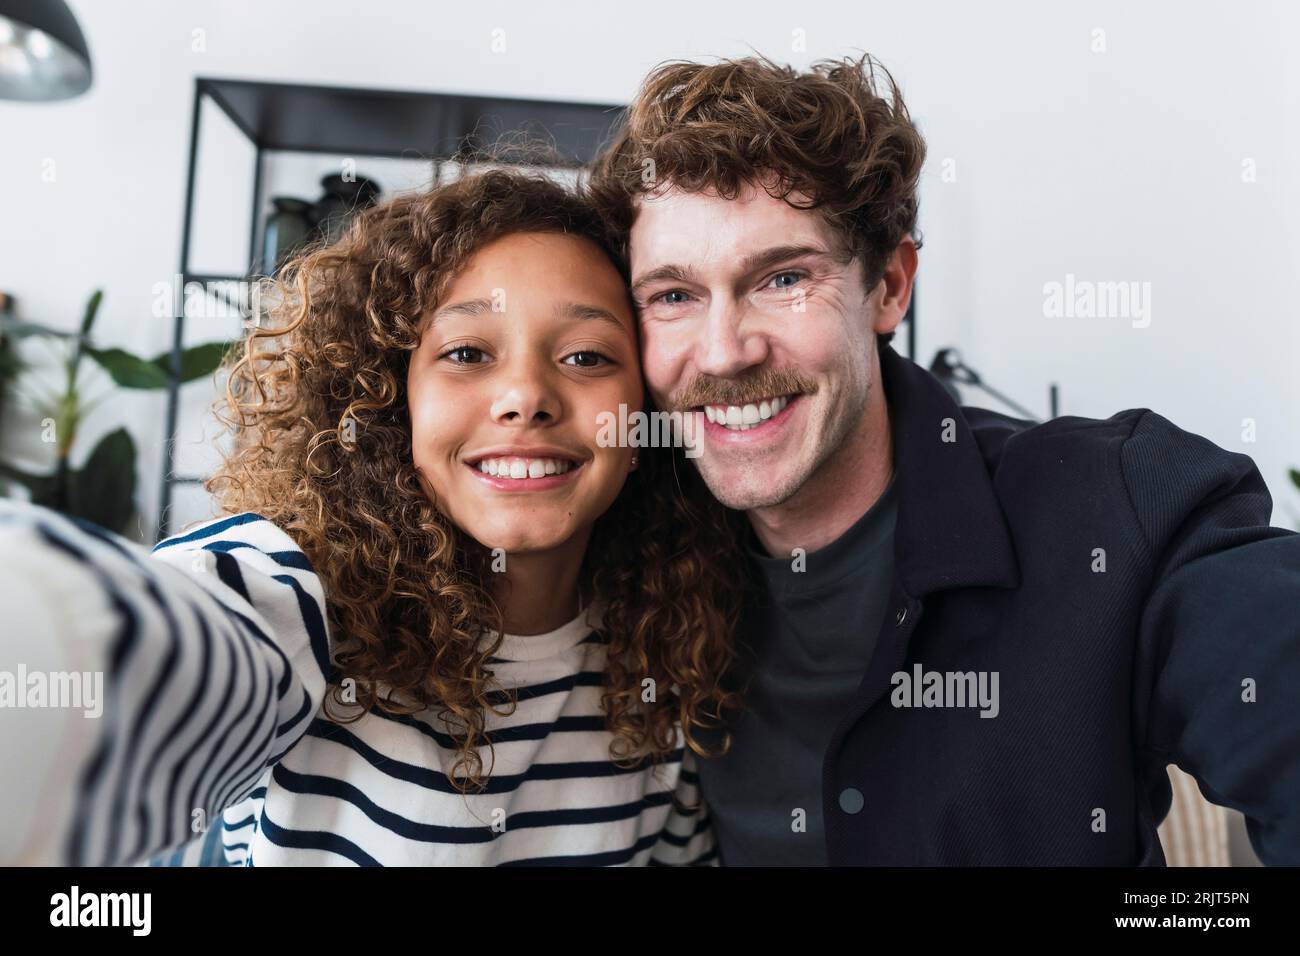 Father and daughter capture a joyful moment with a selfie, free from worries and enjoying each other's company Stock Photo